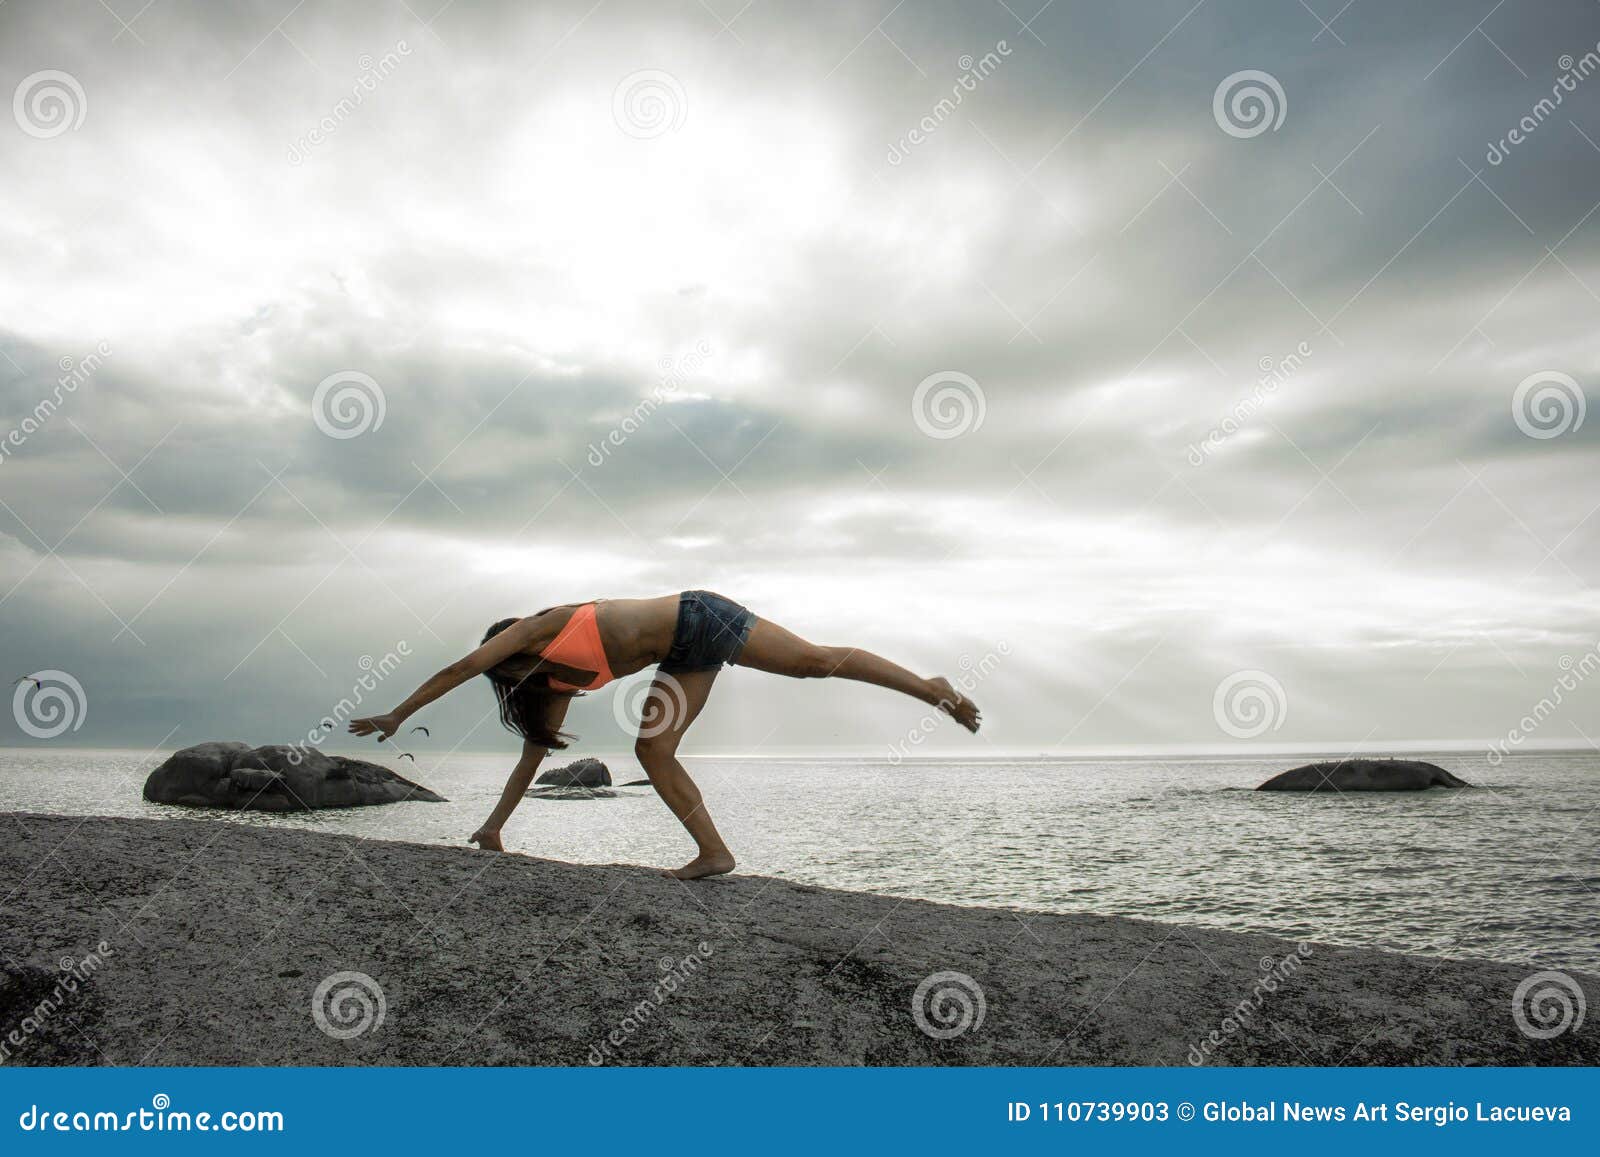 Woman Doing A Handstand On A Rock At Sunset On Bakovern Beach Cape Town Stock Image Image Of